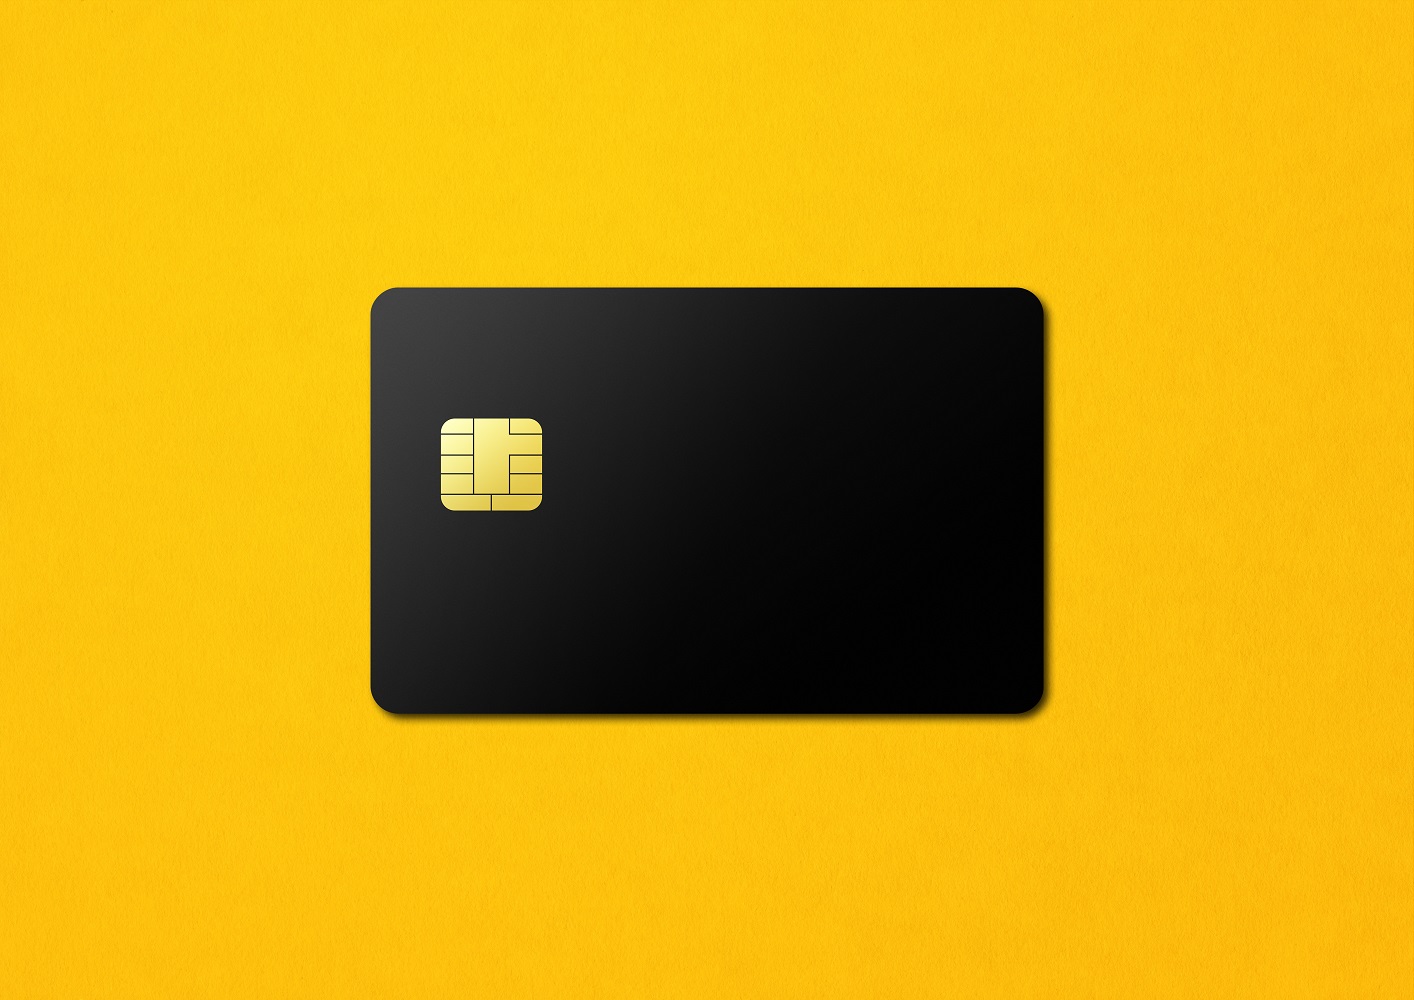 Black credit card on yellow background